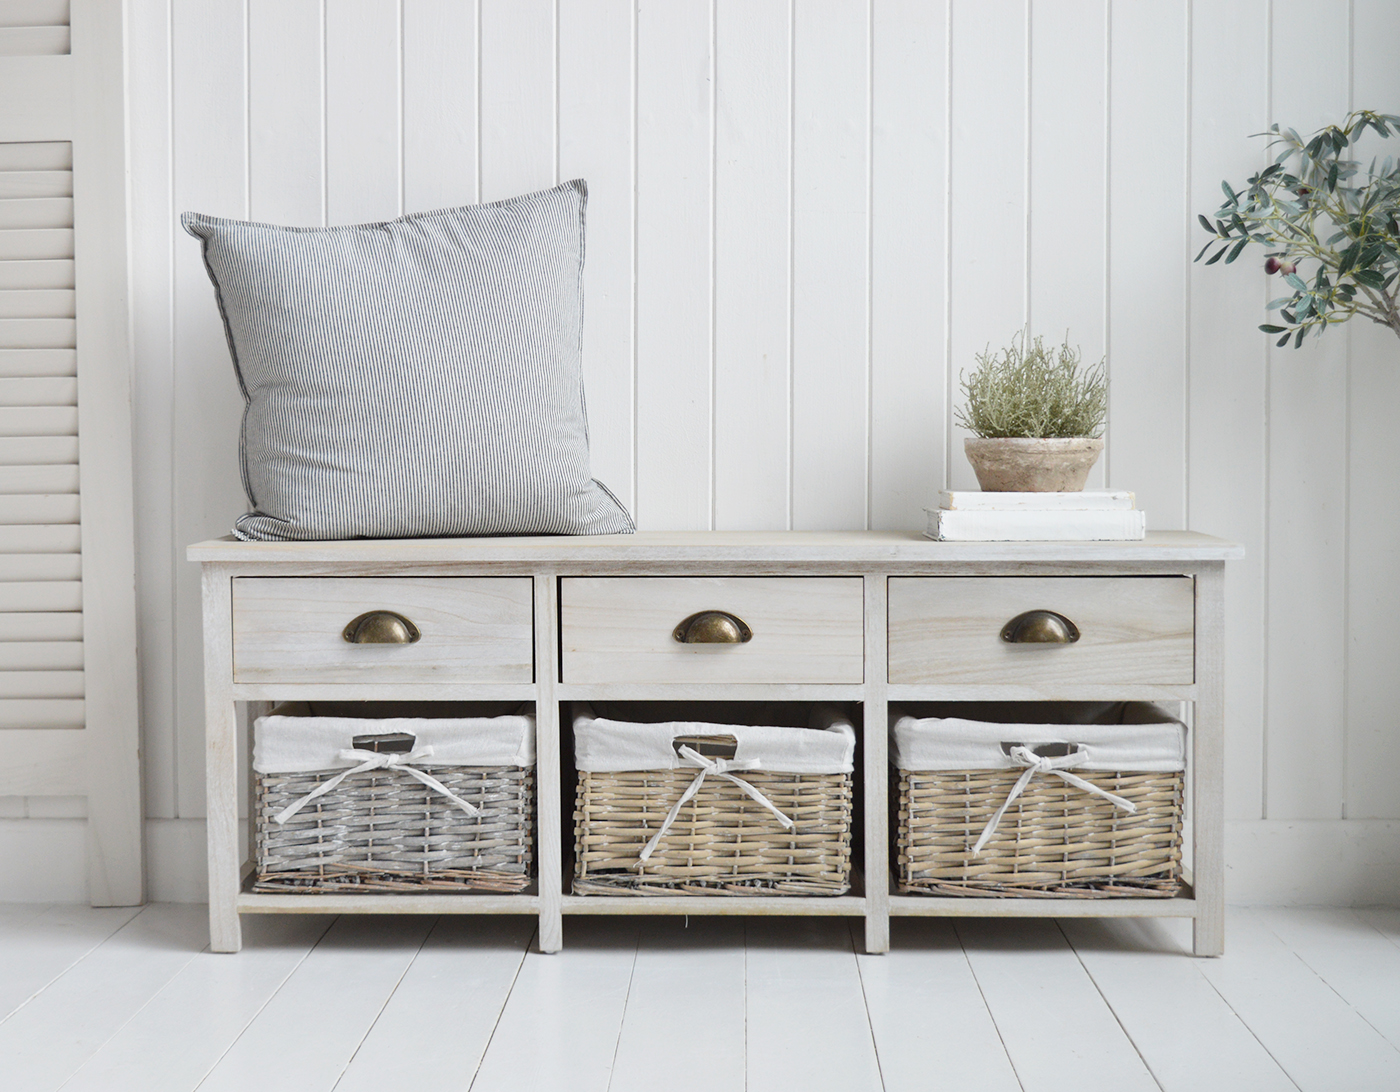 Dorset Storage Bench with drawers and 3  baskets - New England Modern Farmhouse and Coastal Furniture and interiors